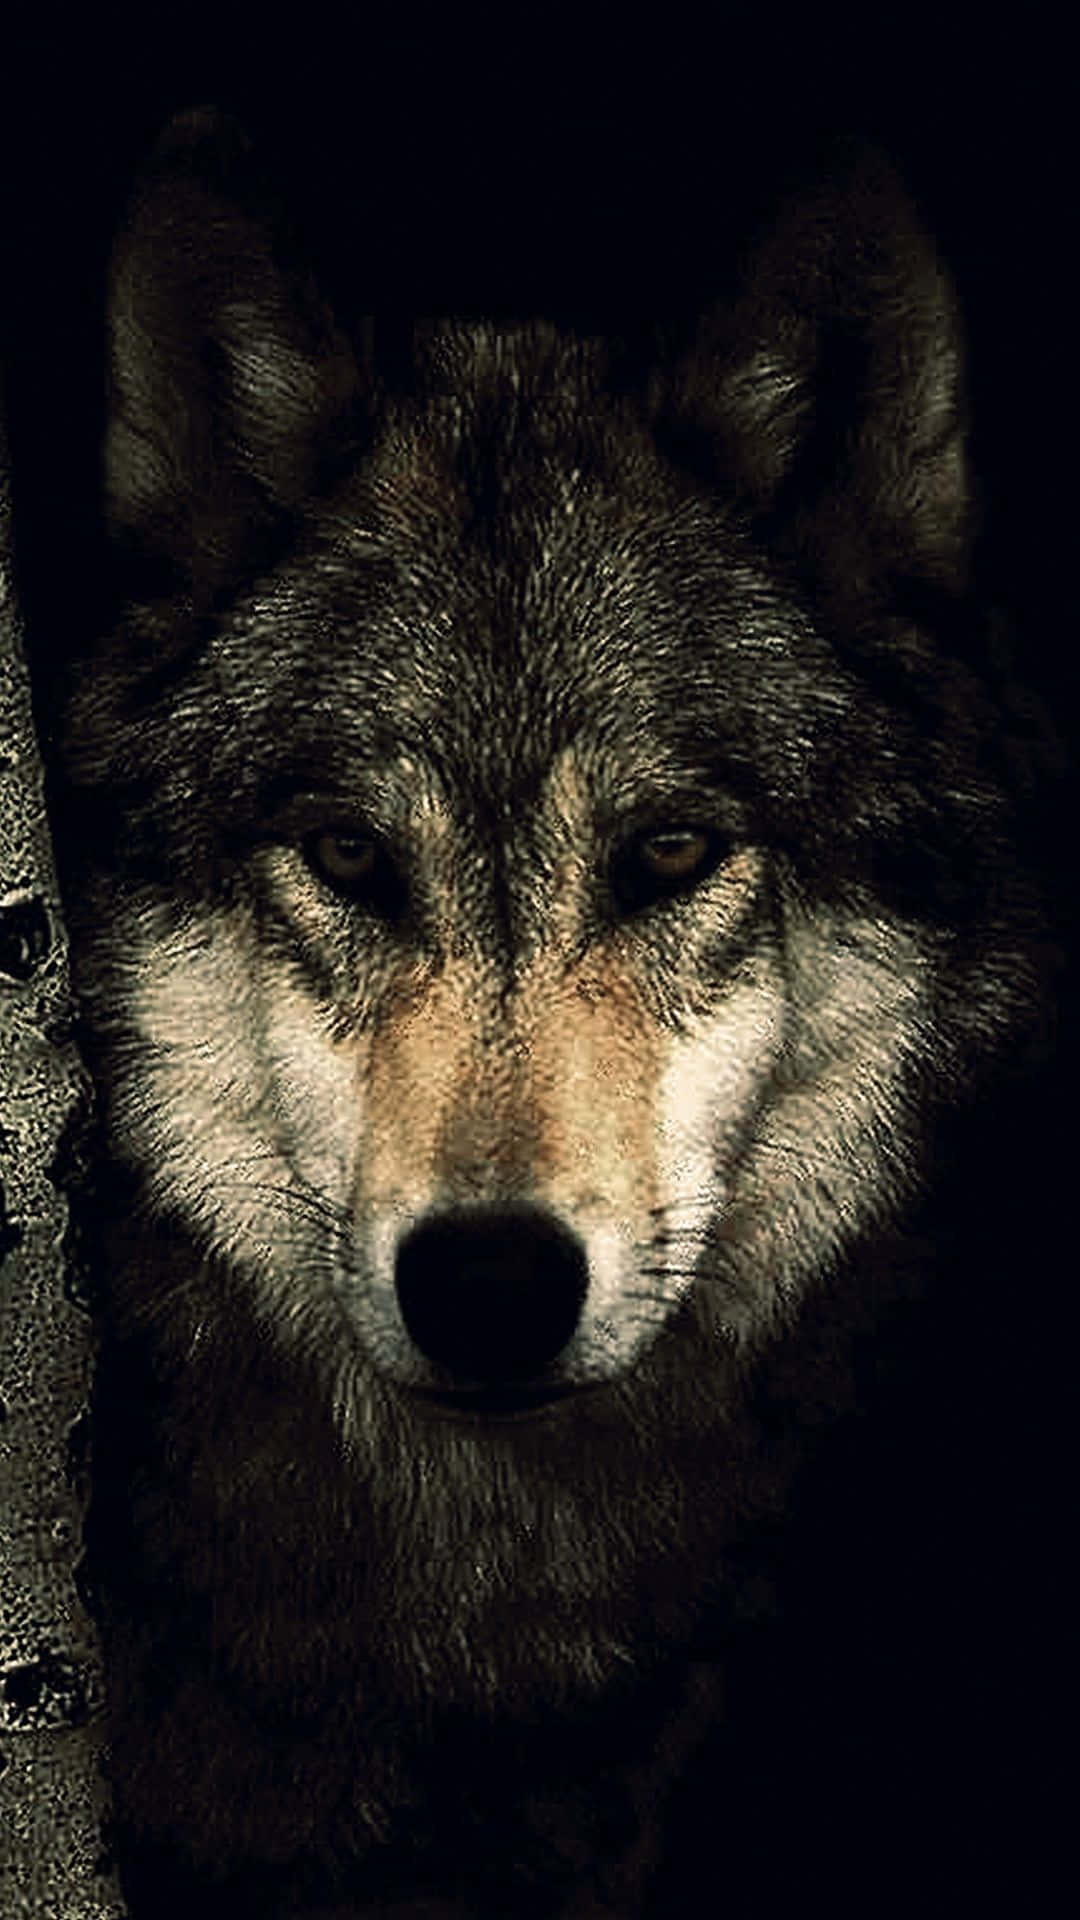 Download A Wolf Is Looking At The Camera In The Dark Wallpaper ...